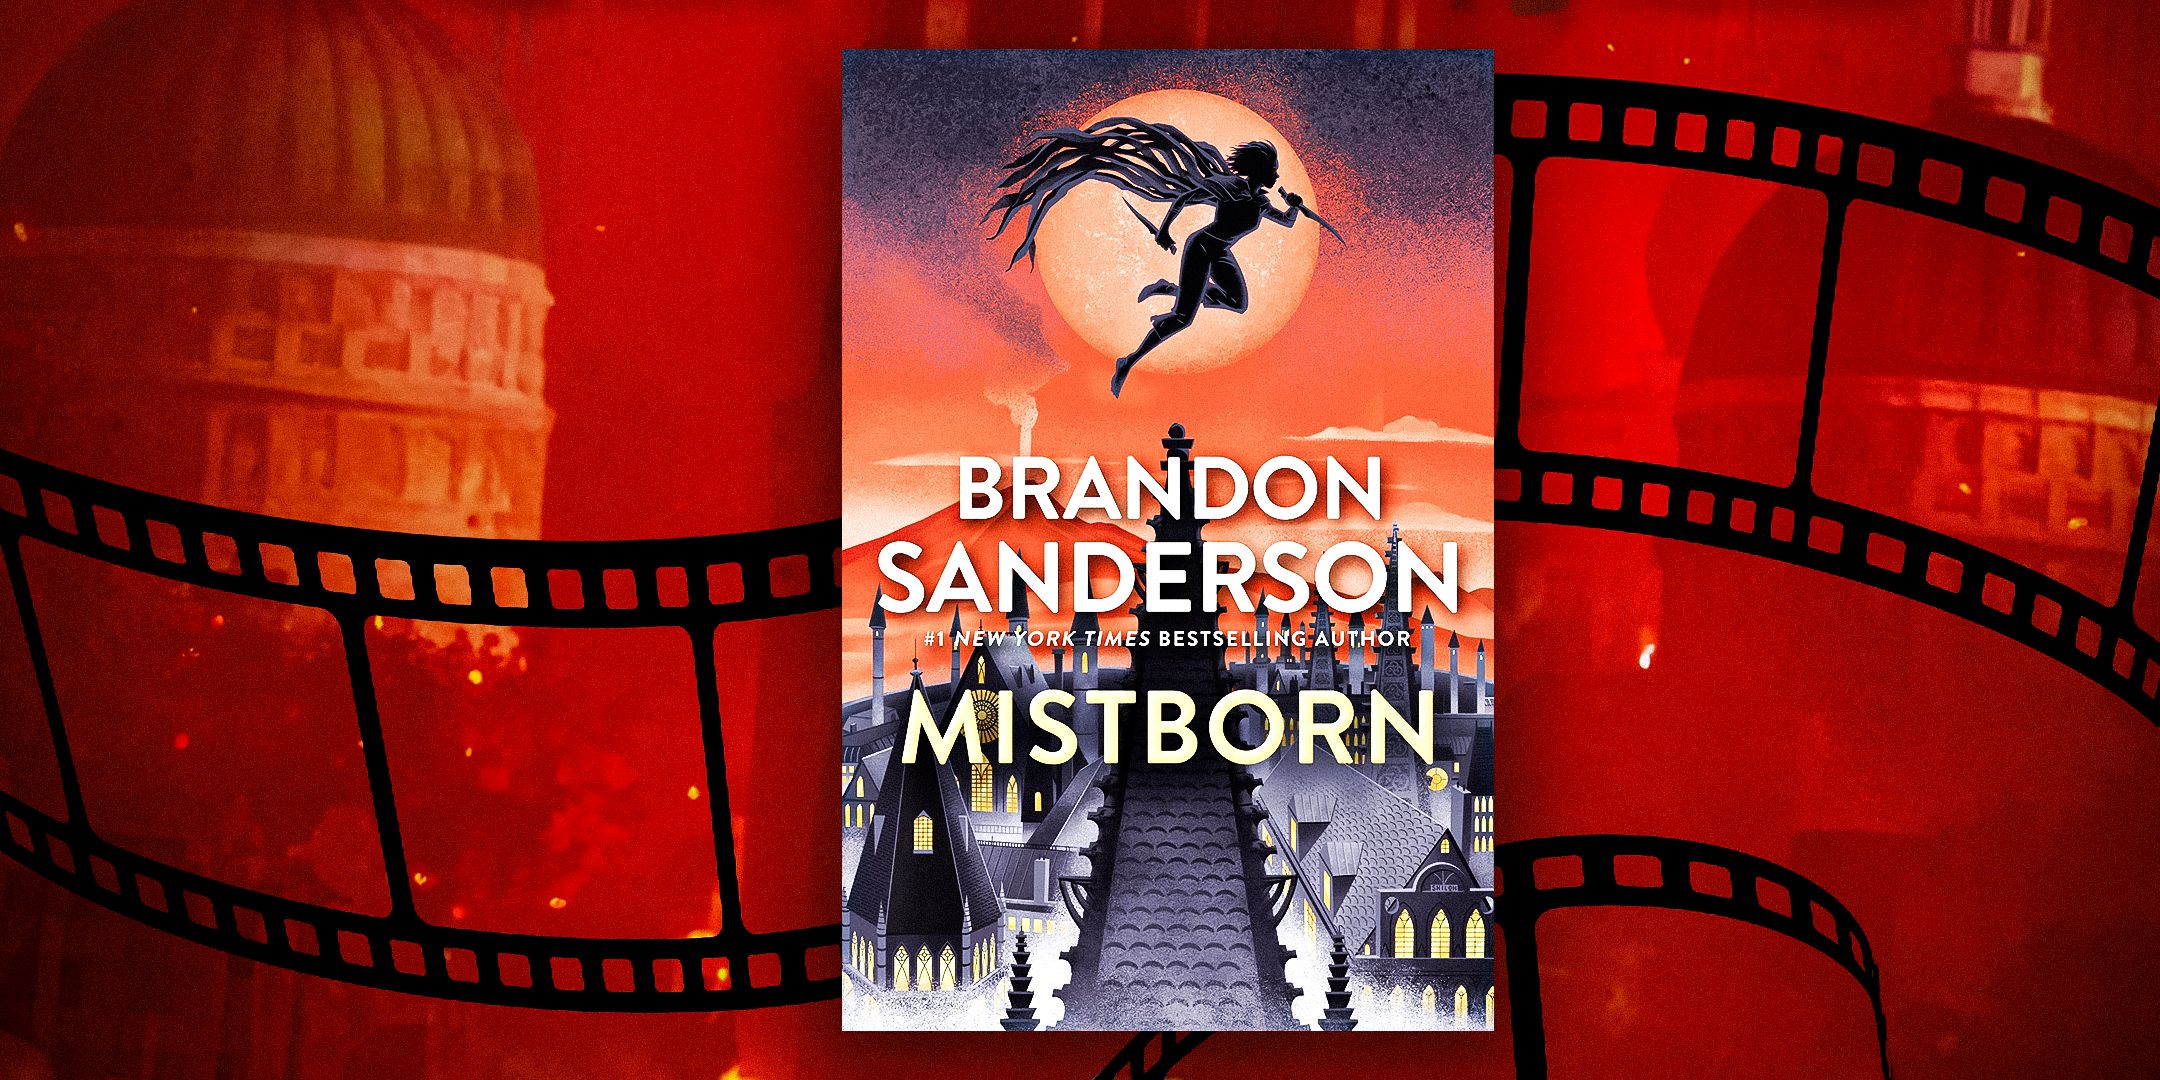 Mistborn book cover with a film reel background